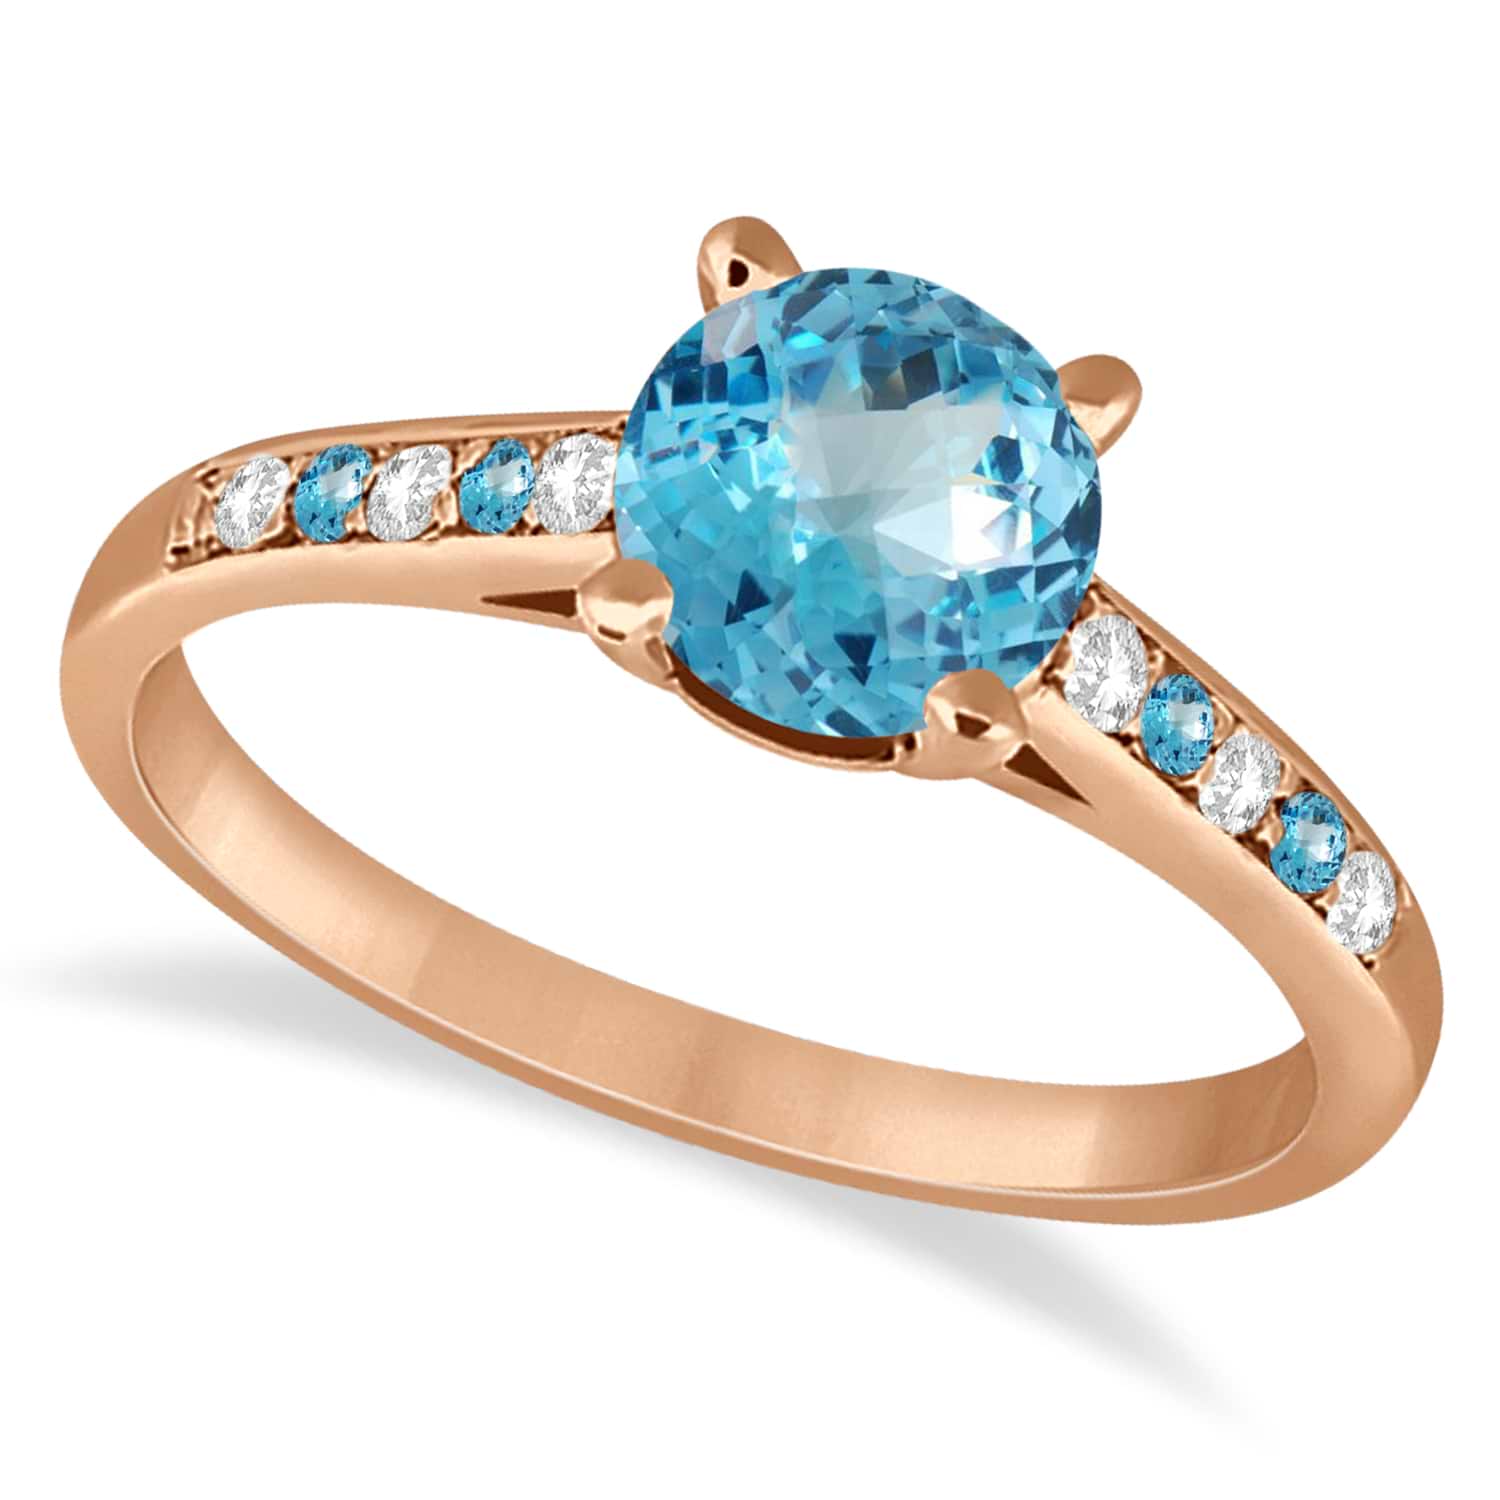 Cathedral Blue Topaz & Diamond Engagement Ring 18k Rose Gold (1.20ct)